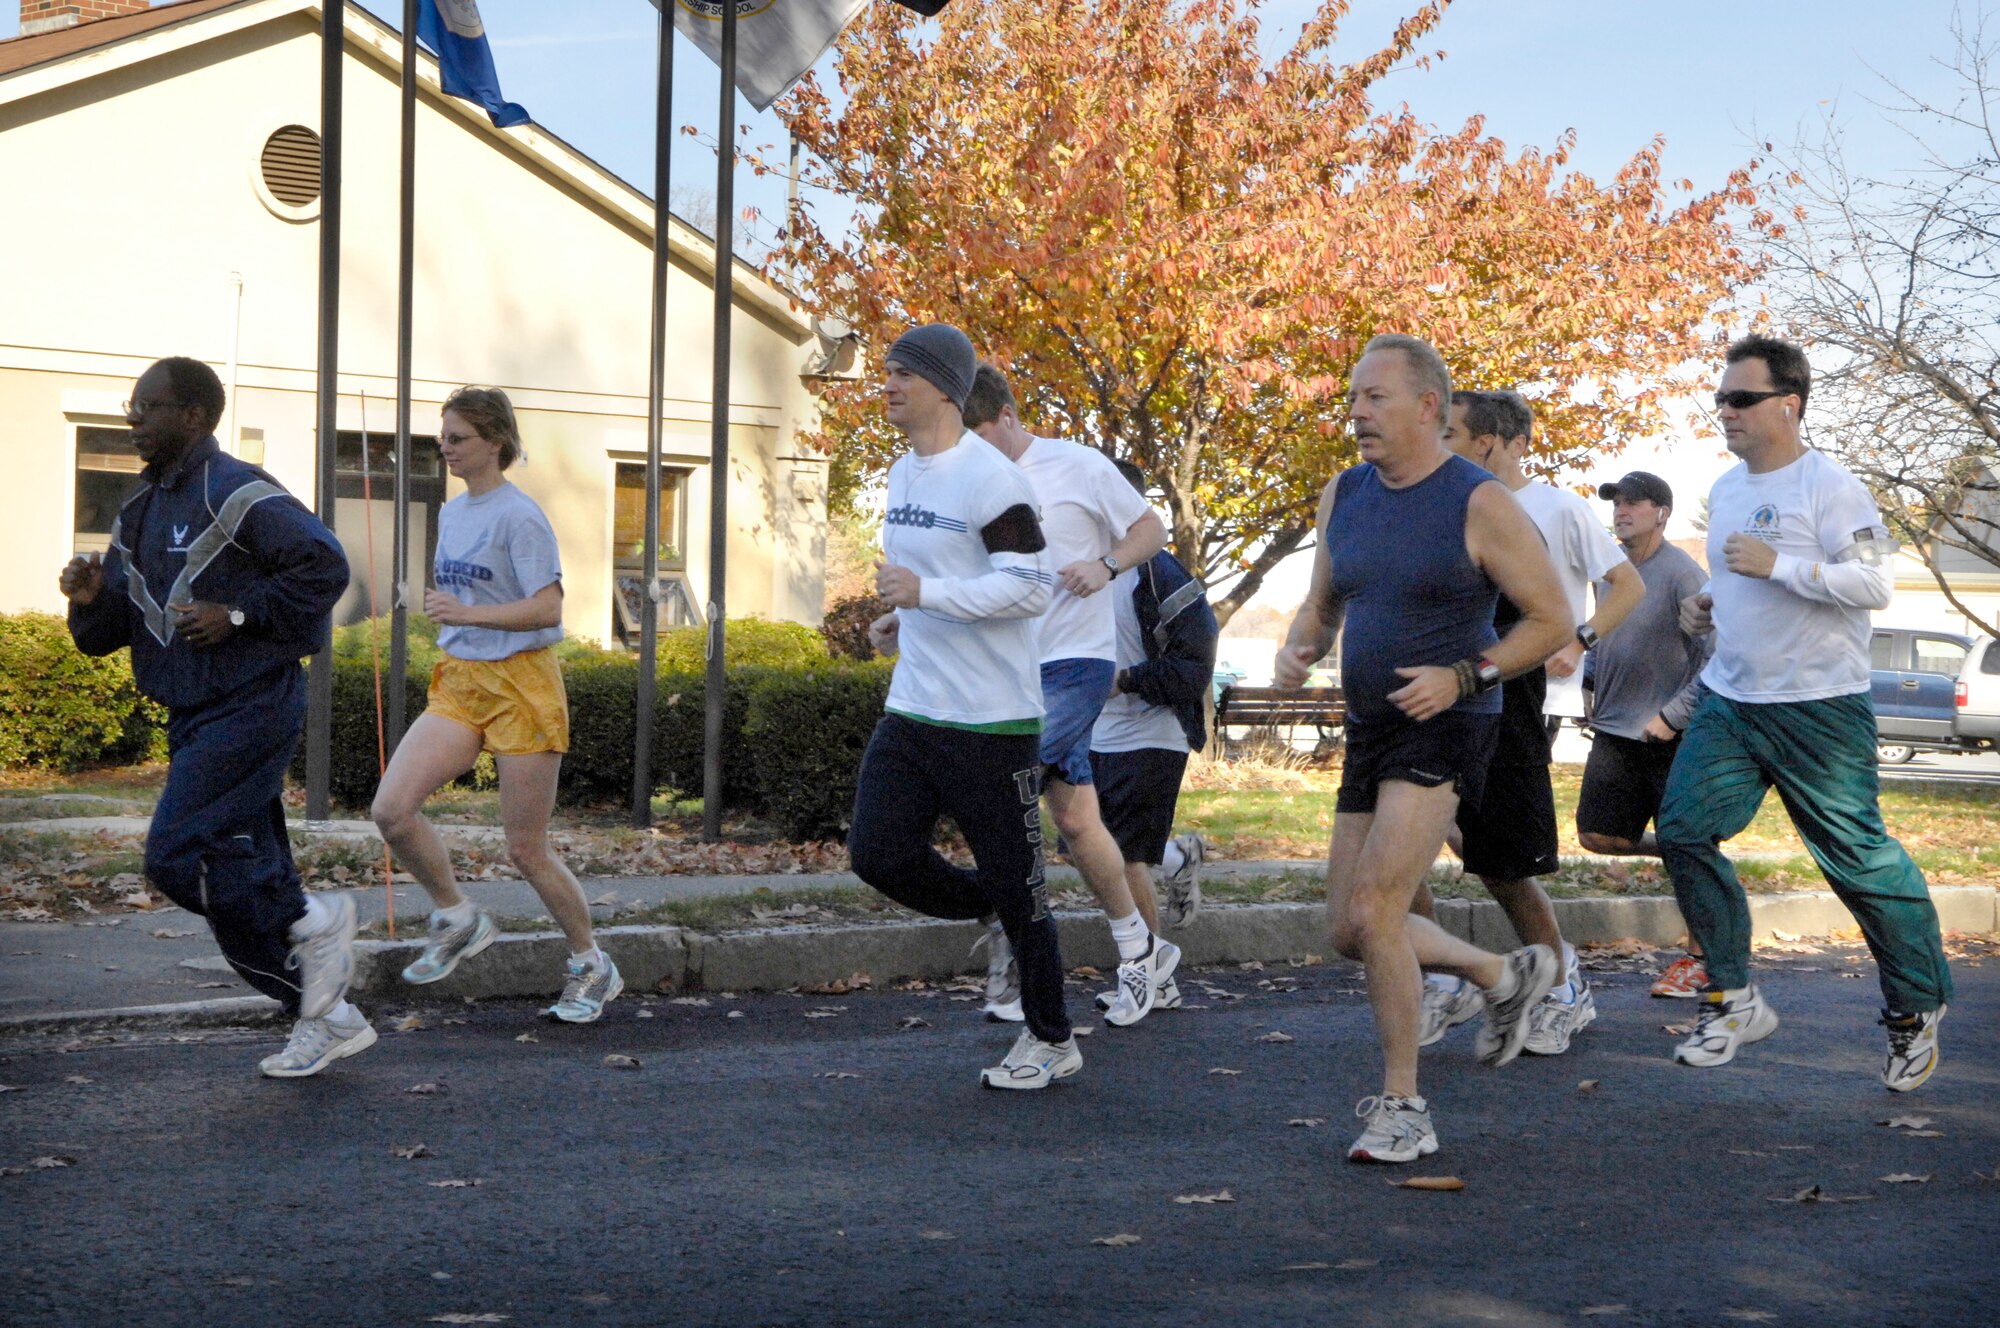 HANSCOM AFB, Mass. – Hanscom runners enjoy the sunny autumn weather while participating in the Fitness and Sports Center’s Pilgrim’s Parade Fun Run Nov. 14. In the male category, Erik Duerr, MIT Lincoln Lab, placed first with a time of 18:52. Joe Fischetti, MIT Lincoln Lab, and Capt. David Jarvis, 652nd Electronic Systems Squadron, followed with the times 19:13 and 21:11 respectively. Susan Miller, 652 ELSS, finished with a time of 28:20 in the female category. For more information on upcoming Fitness and Sports Center events and classes, visit www.hanscomservices.com/FitnessandSportsCenter.html. (U.S. Air Force photos by Mark Wyatt.) 

